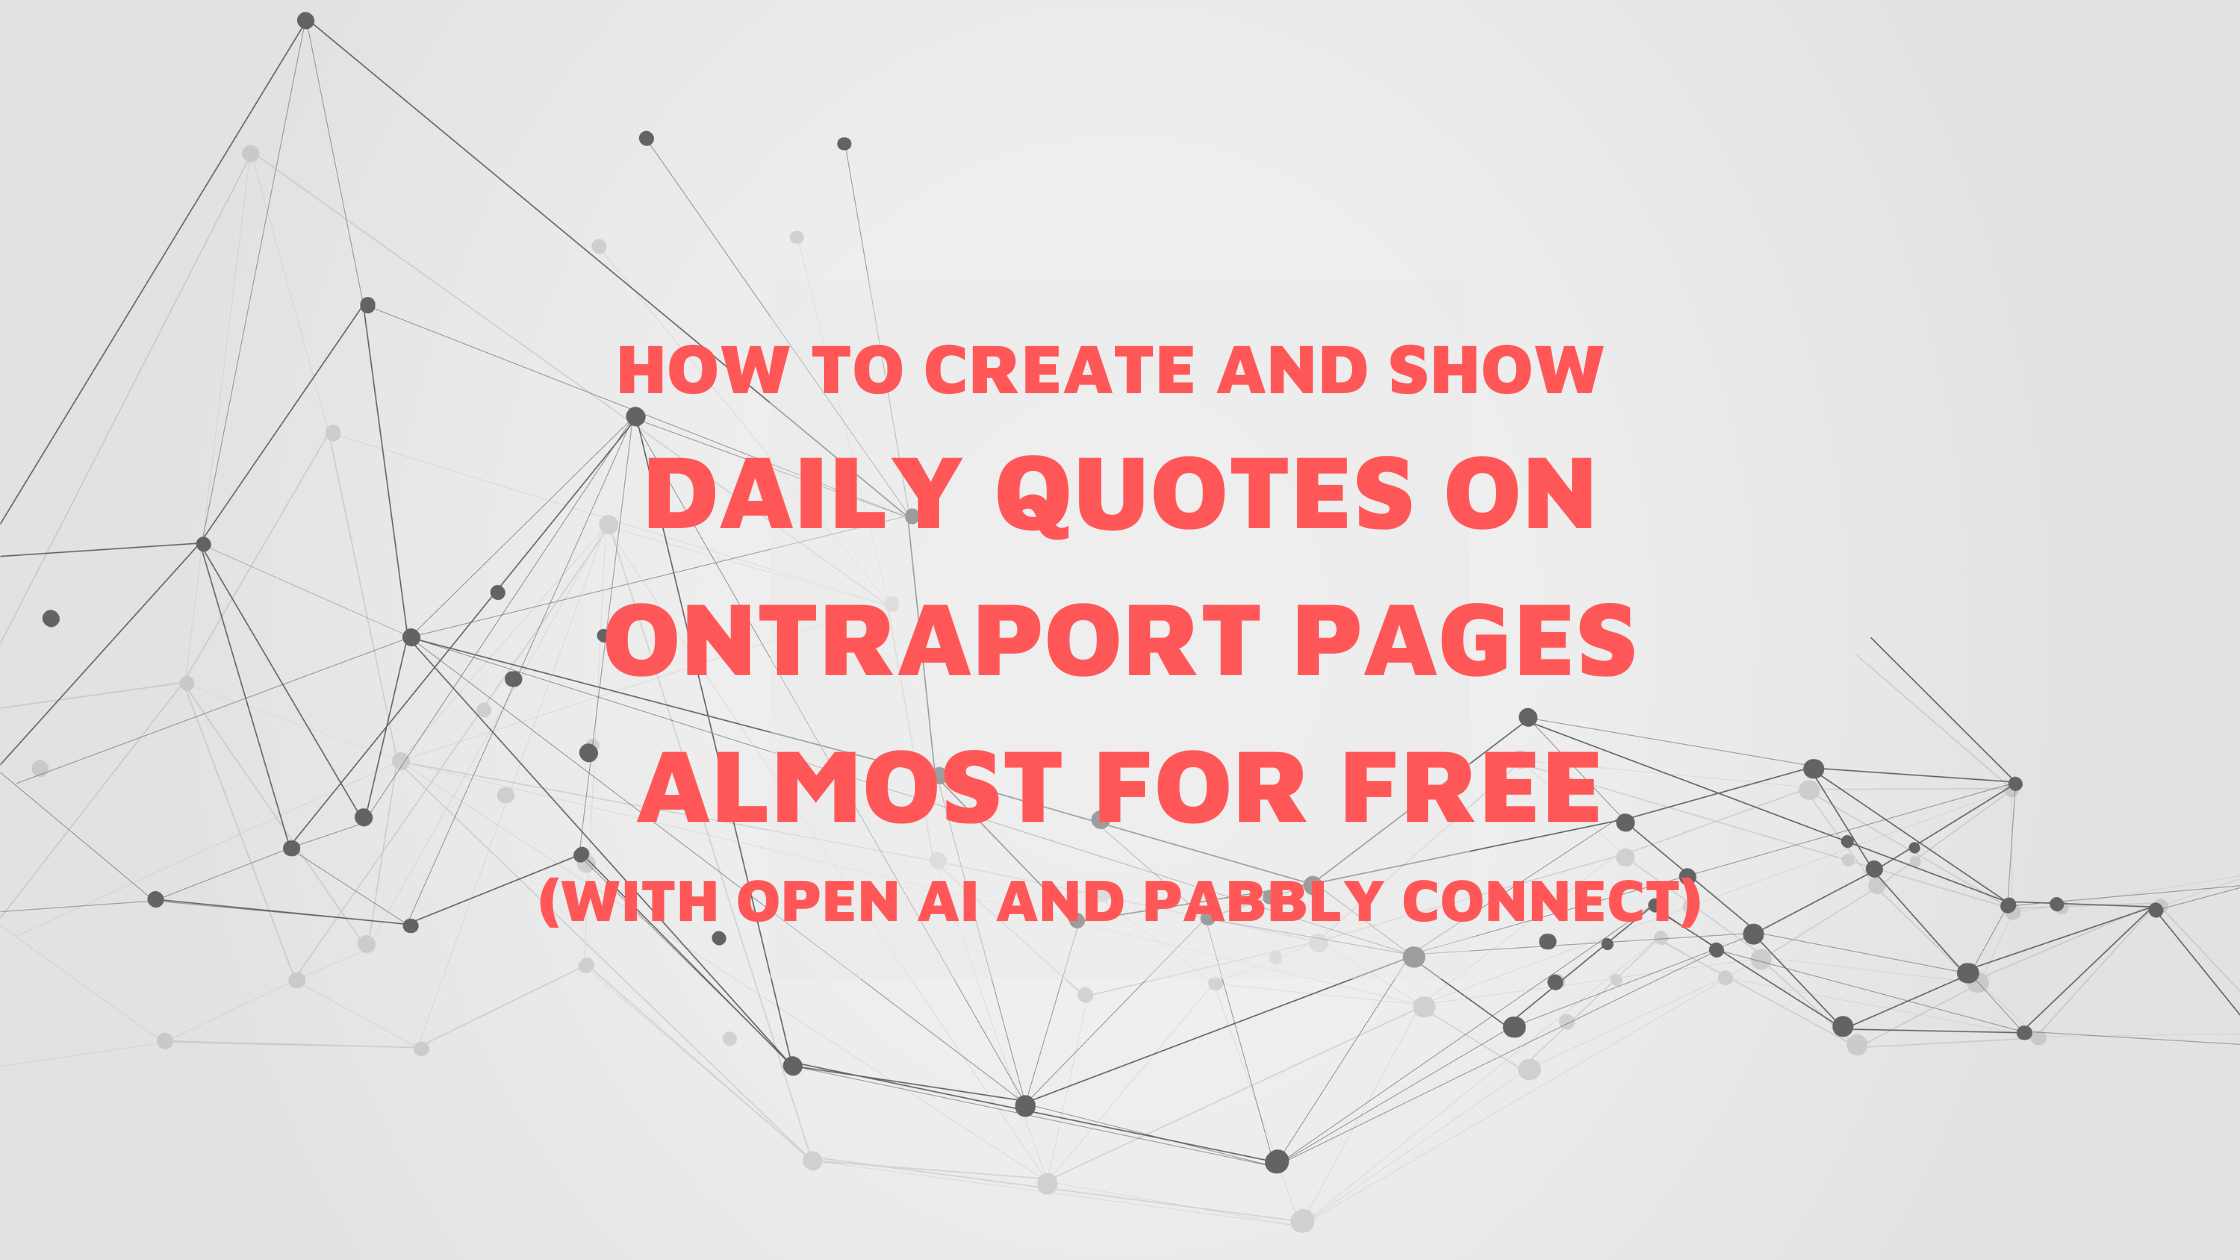 How to create and show daily quotes on Ontraport pages almost for free